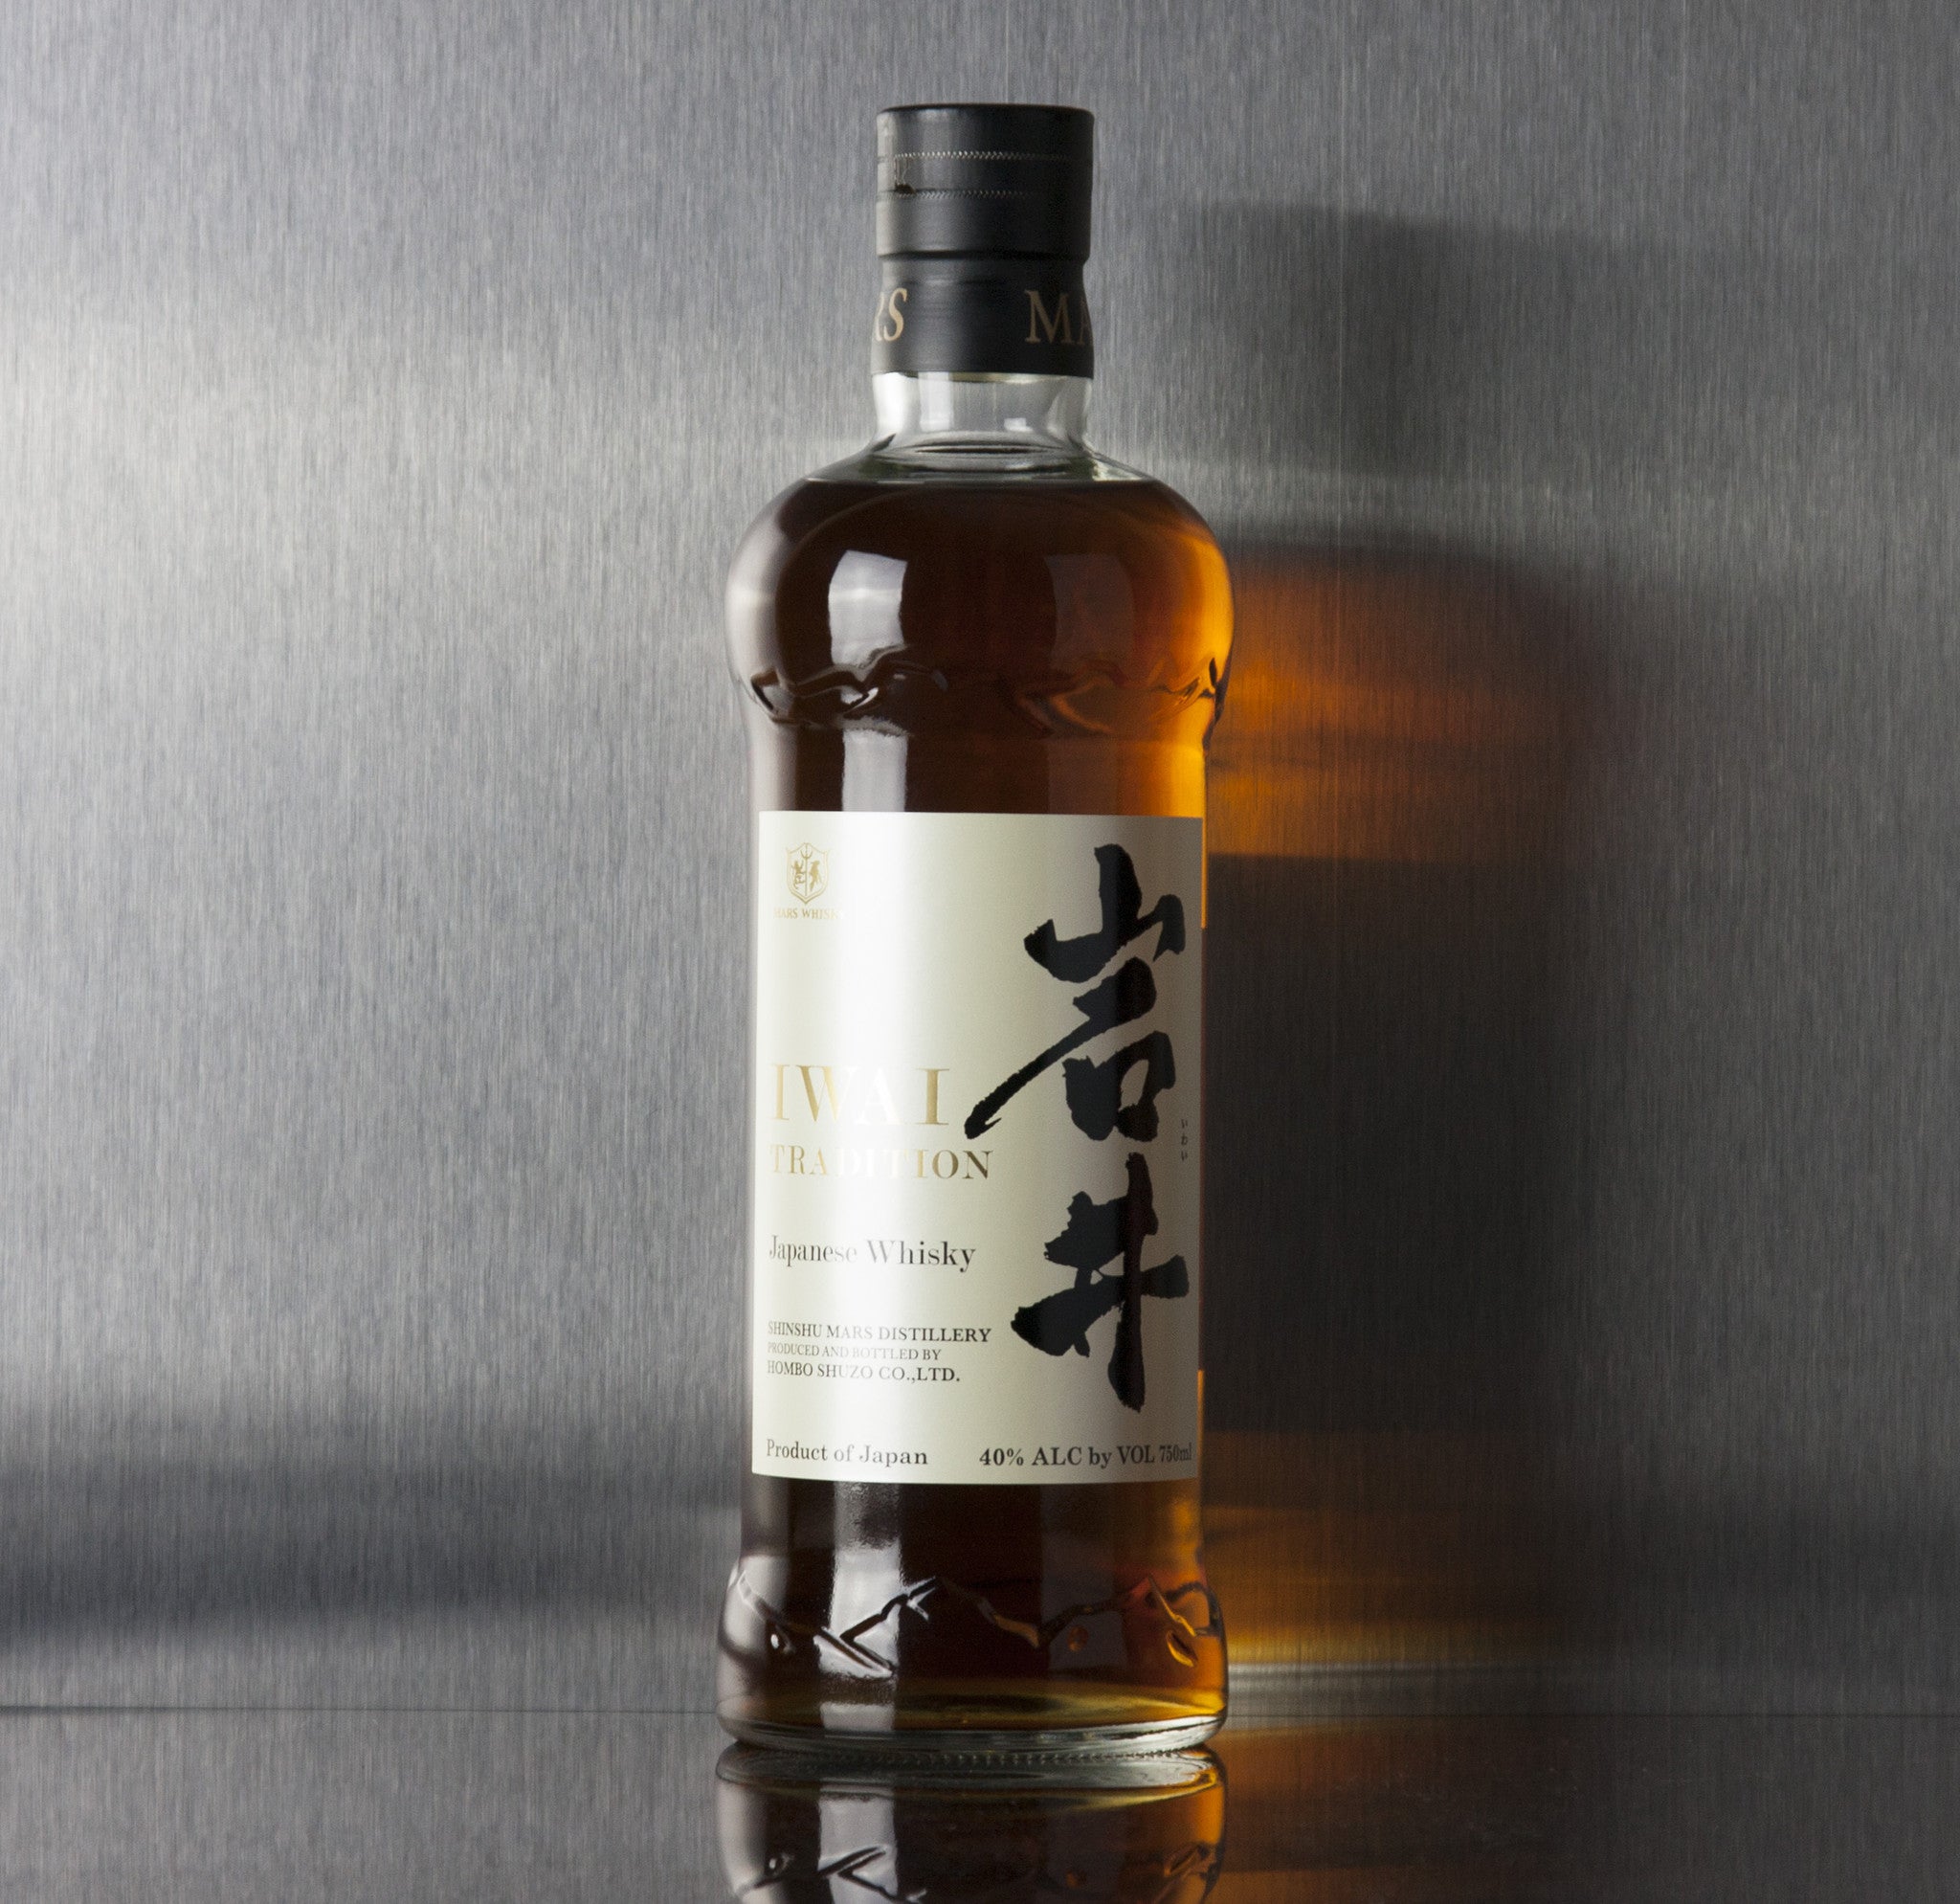 Mars Iwai Tradition Blended Whisky 750 ml